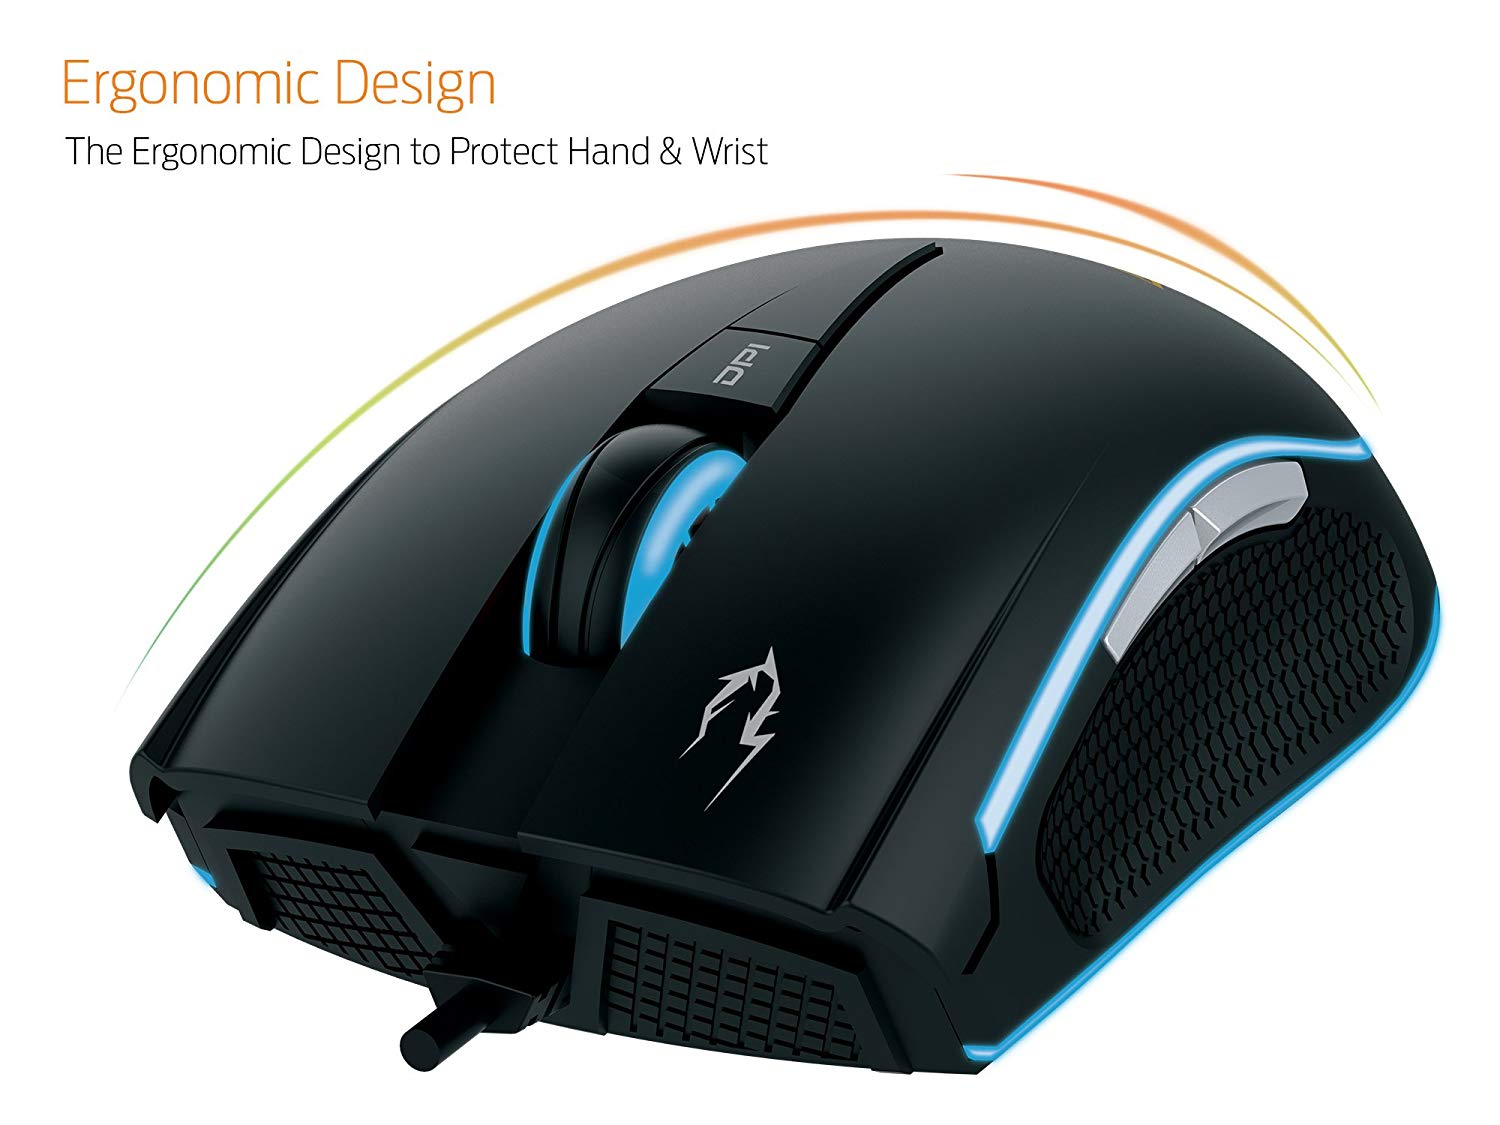 GAMDIAS Optical Gaming Mouse with 6 Smart Buttons, Double Level Multi-Color Lighting and Gaming Mouse Mat (ZEUS E1)